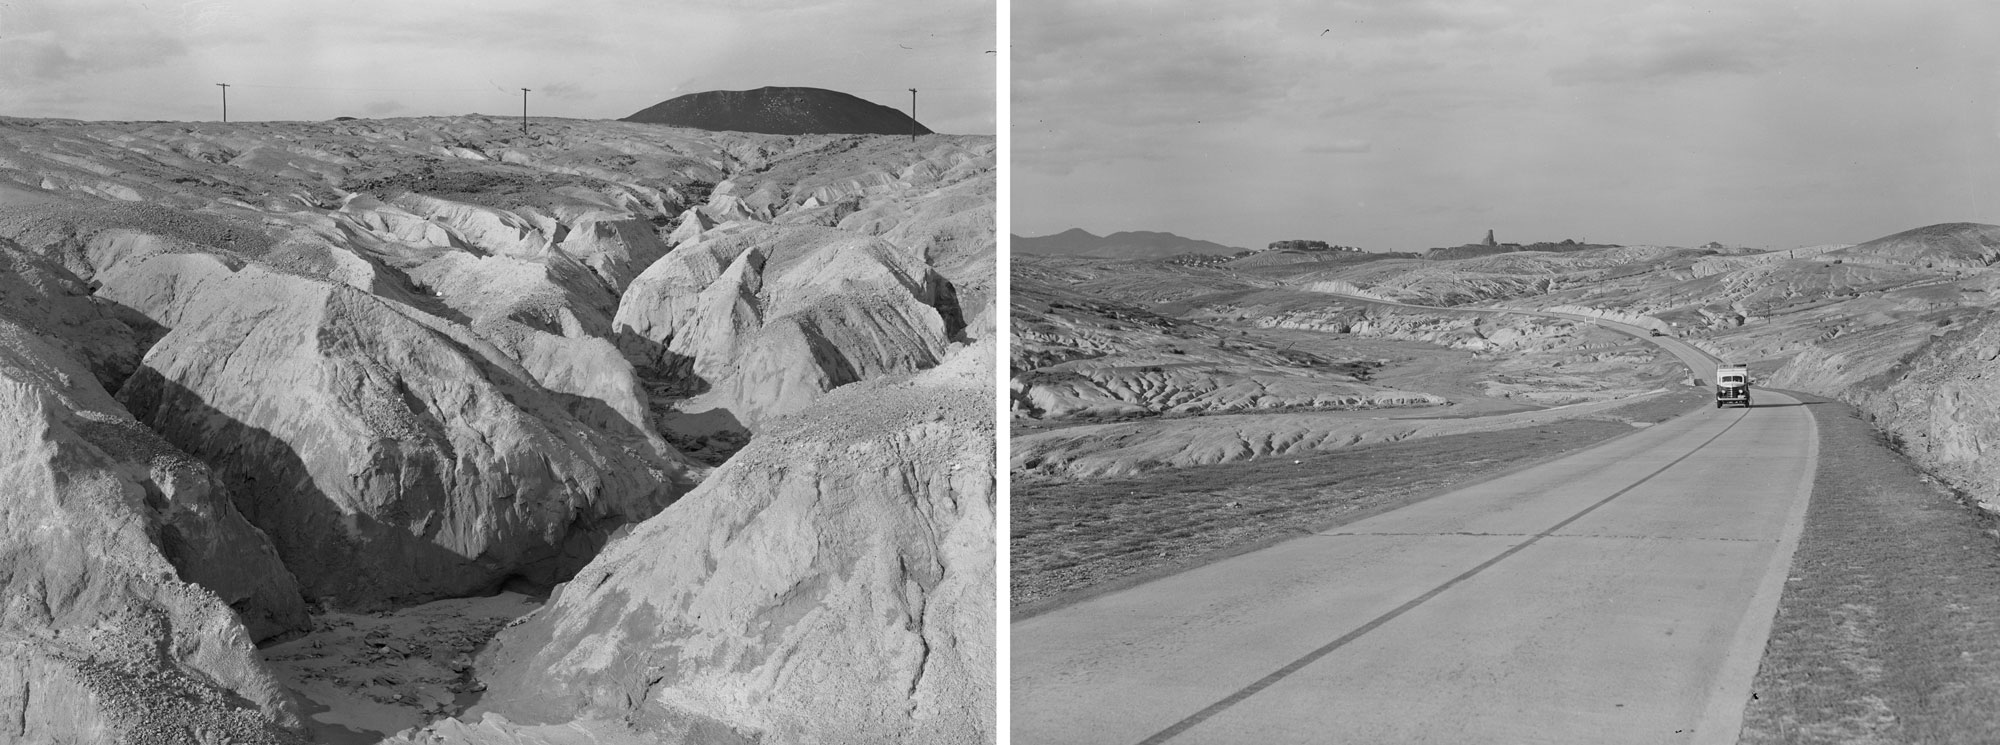 2-Panel image, black and white photos of environmental destruction associated with copper mining and smelting in the Ducktown region of Tennessee. Panel 1: Heavily eroded soil. Panel 2: A road with a car on it traveling through a denuded landscape.